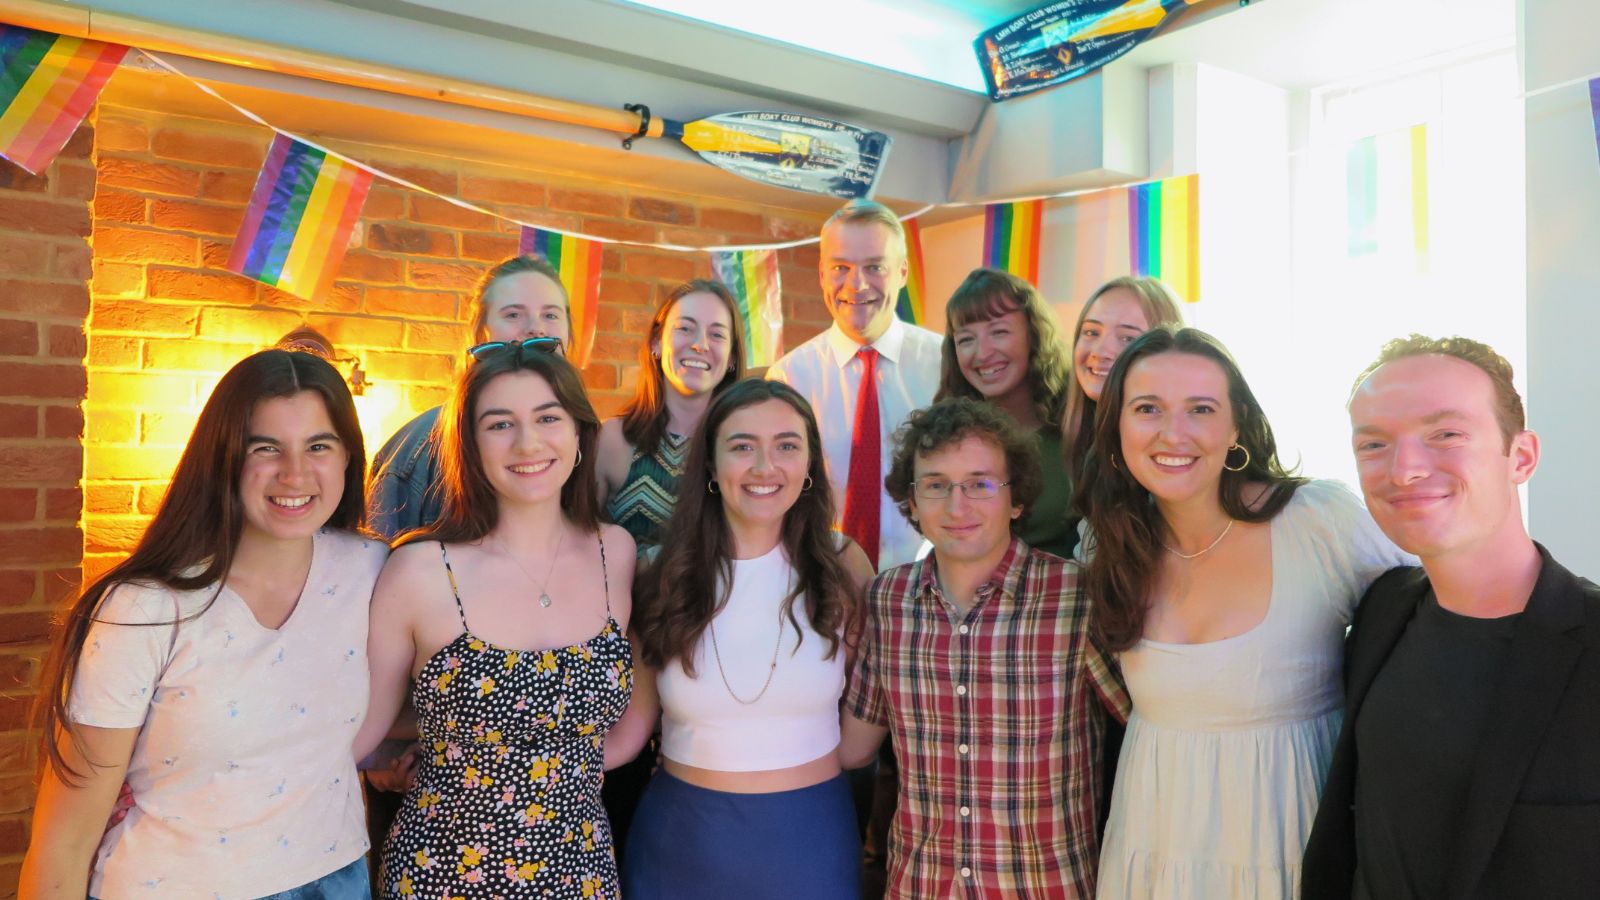 A photo of a group of students standing underneath rainbow banners